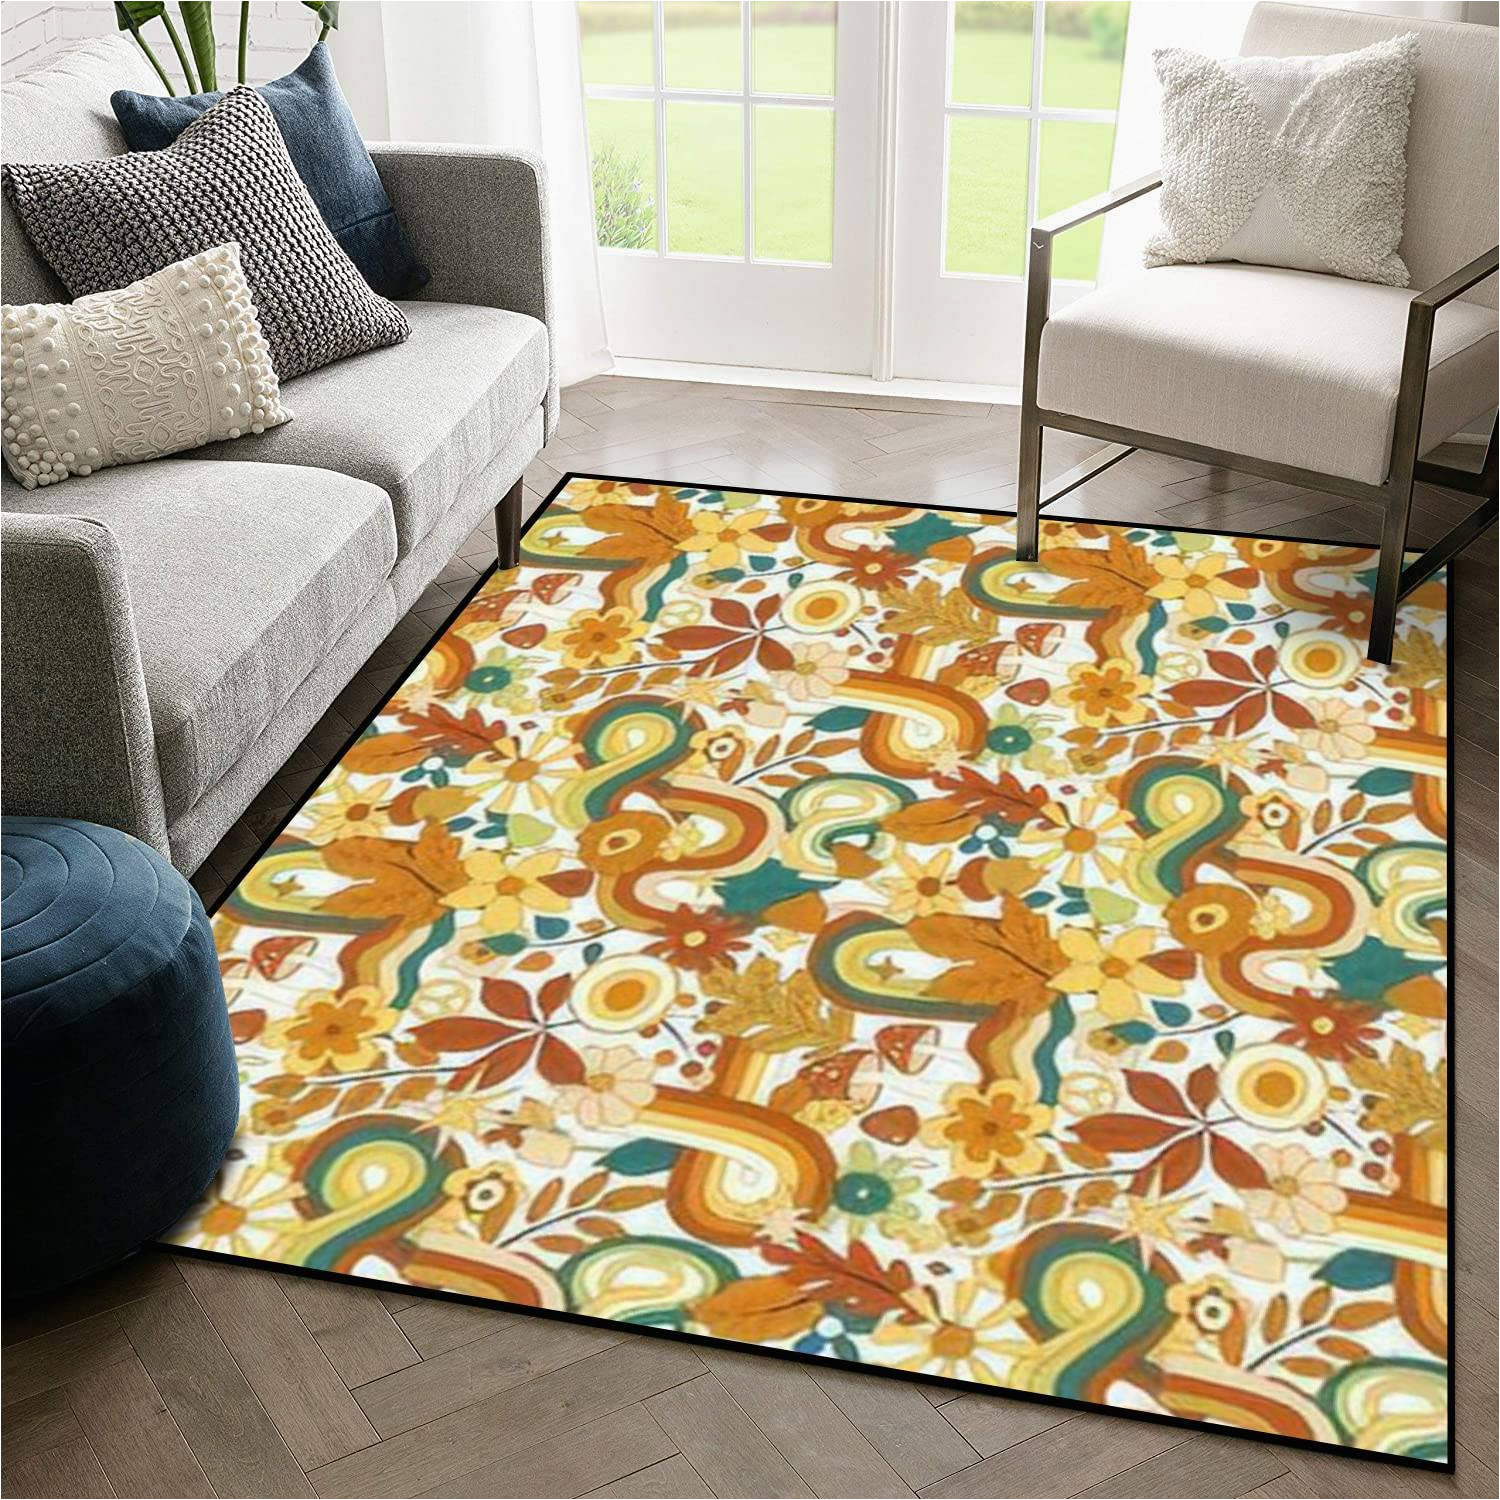 4×6 area Rugs for Sale Home 4×6 Rug area Rug 70s Groovy Hippie Retro Seamless Vintage Floral Wavy Fall with Leaves Non-slip Floor Mat Indoor Outdoor Carpet for Living Room …